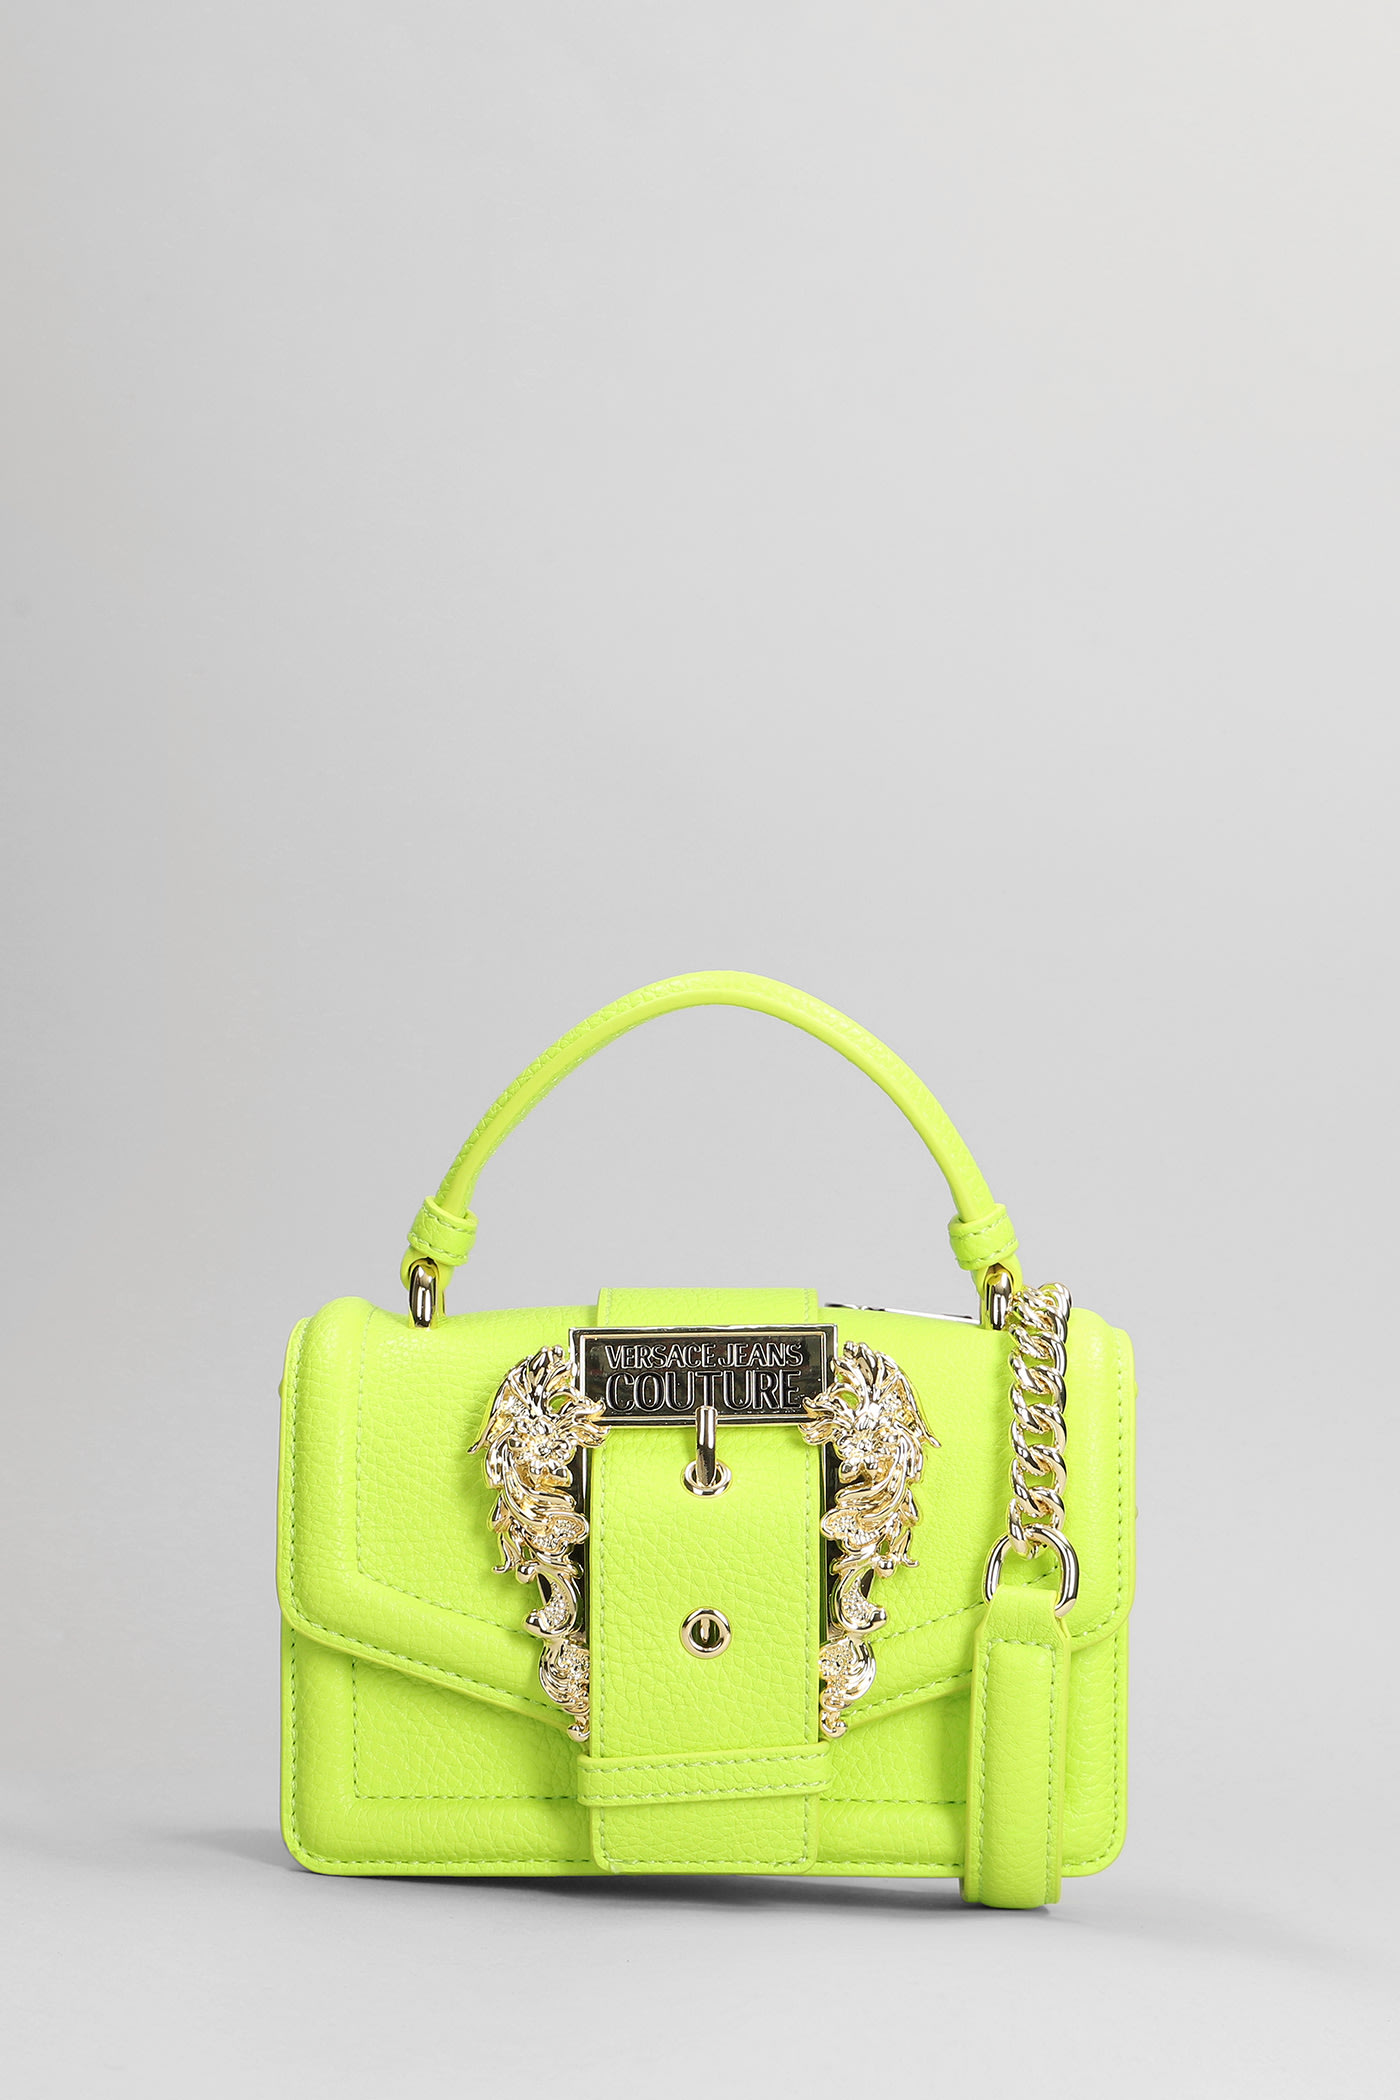 VERSACE JEANS COUTURE HAND BAG IN GREEN FAUX LEATHER